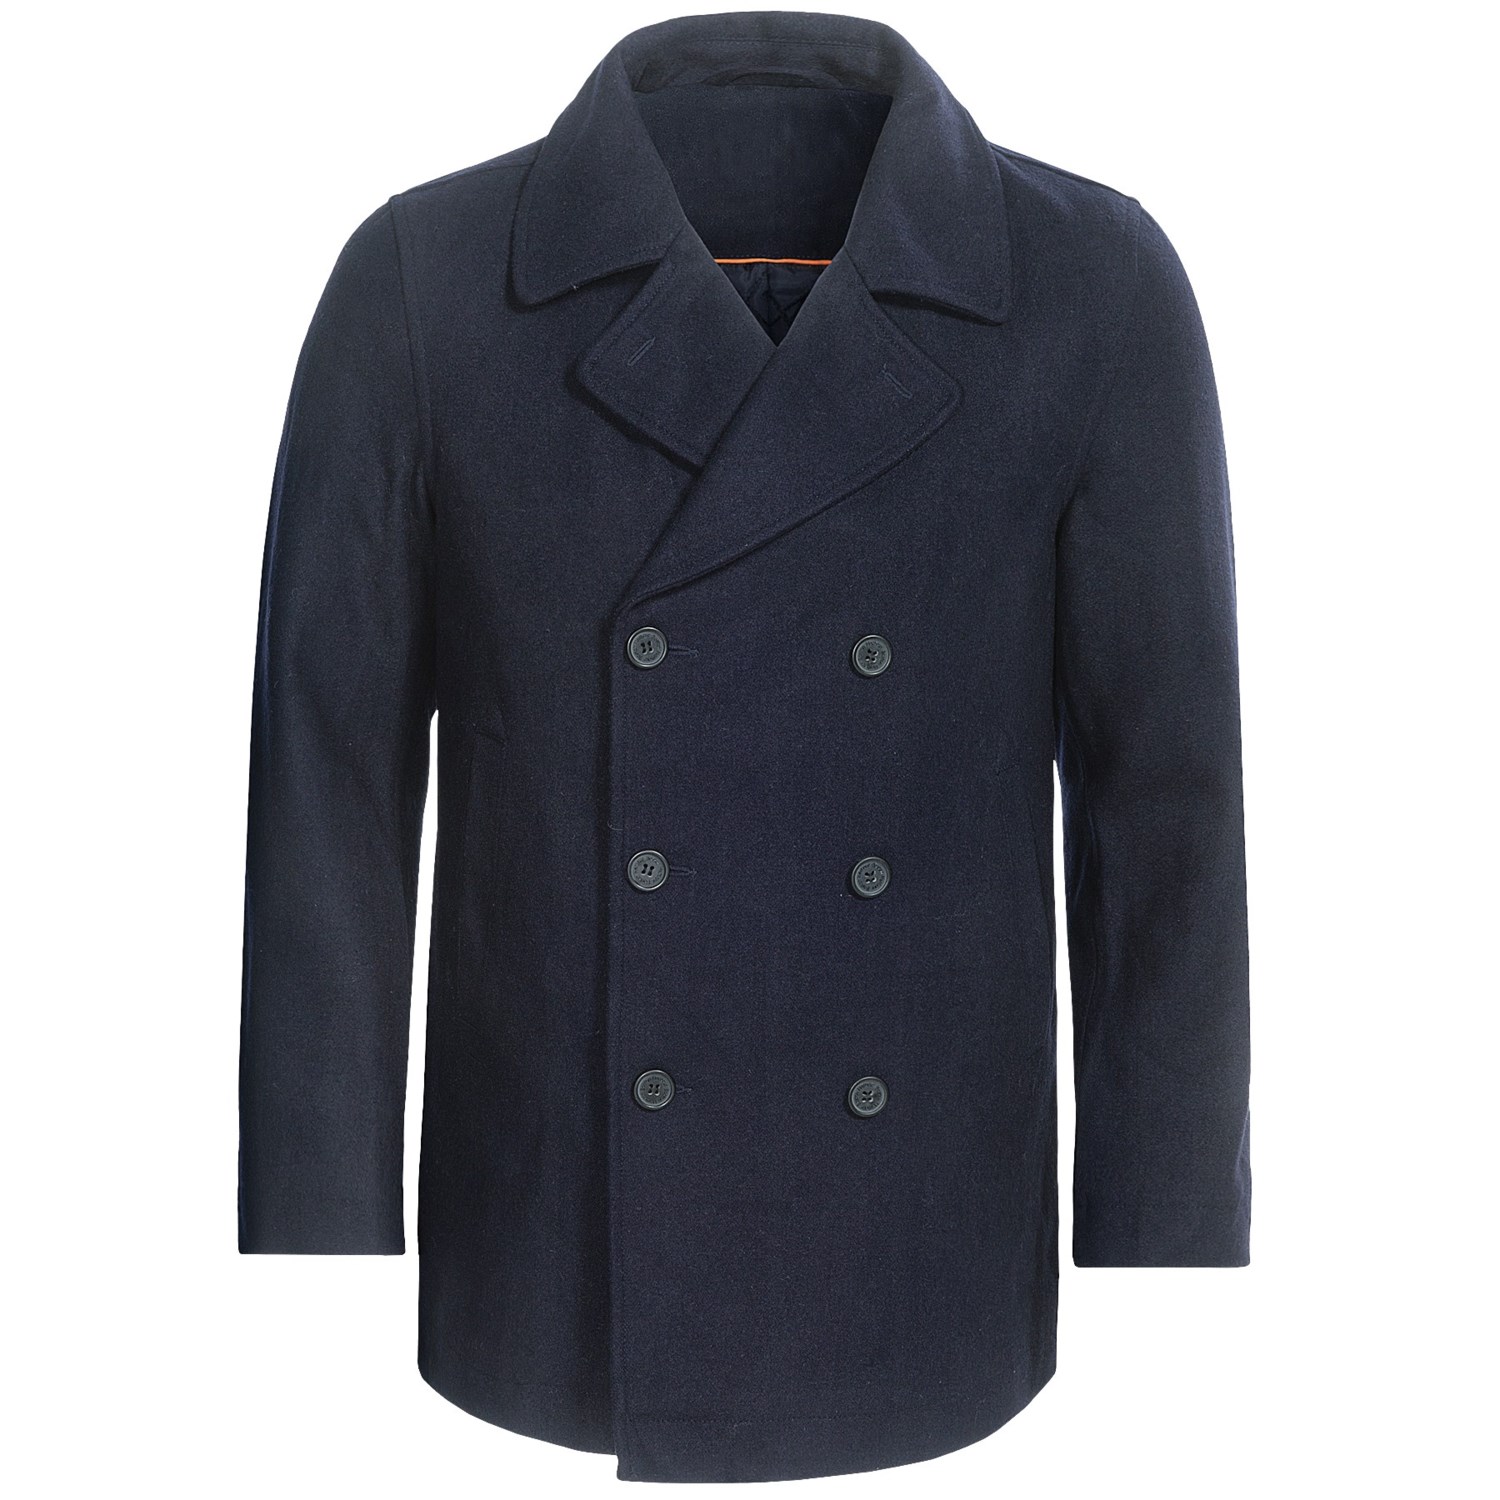 Double-Breasted Pea Coat - Wool Blend, Insulated (For Men) - Save 49%